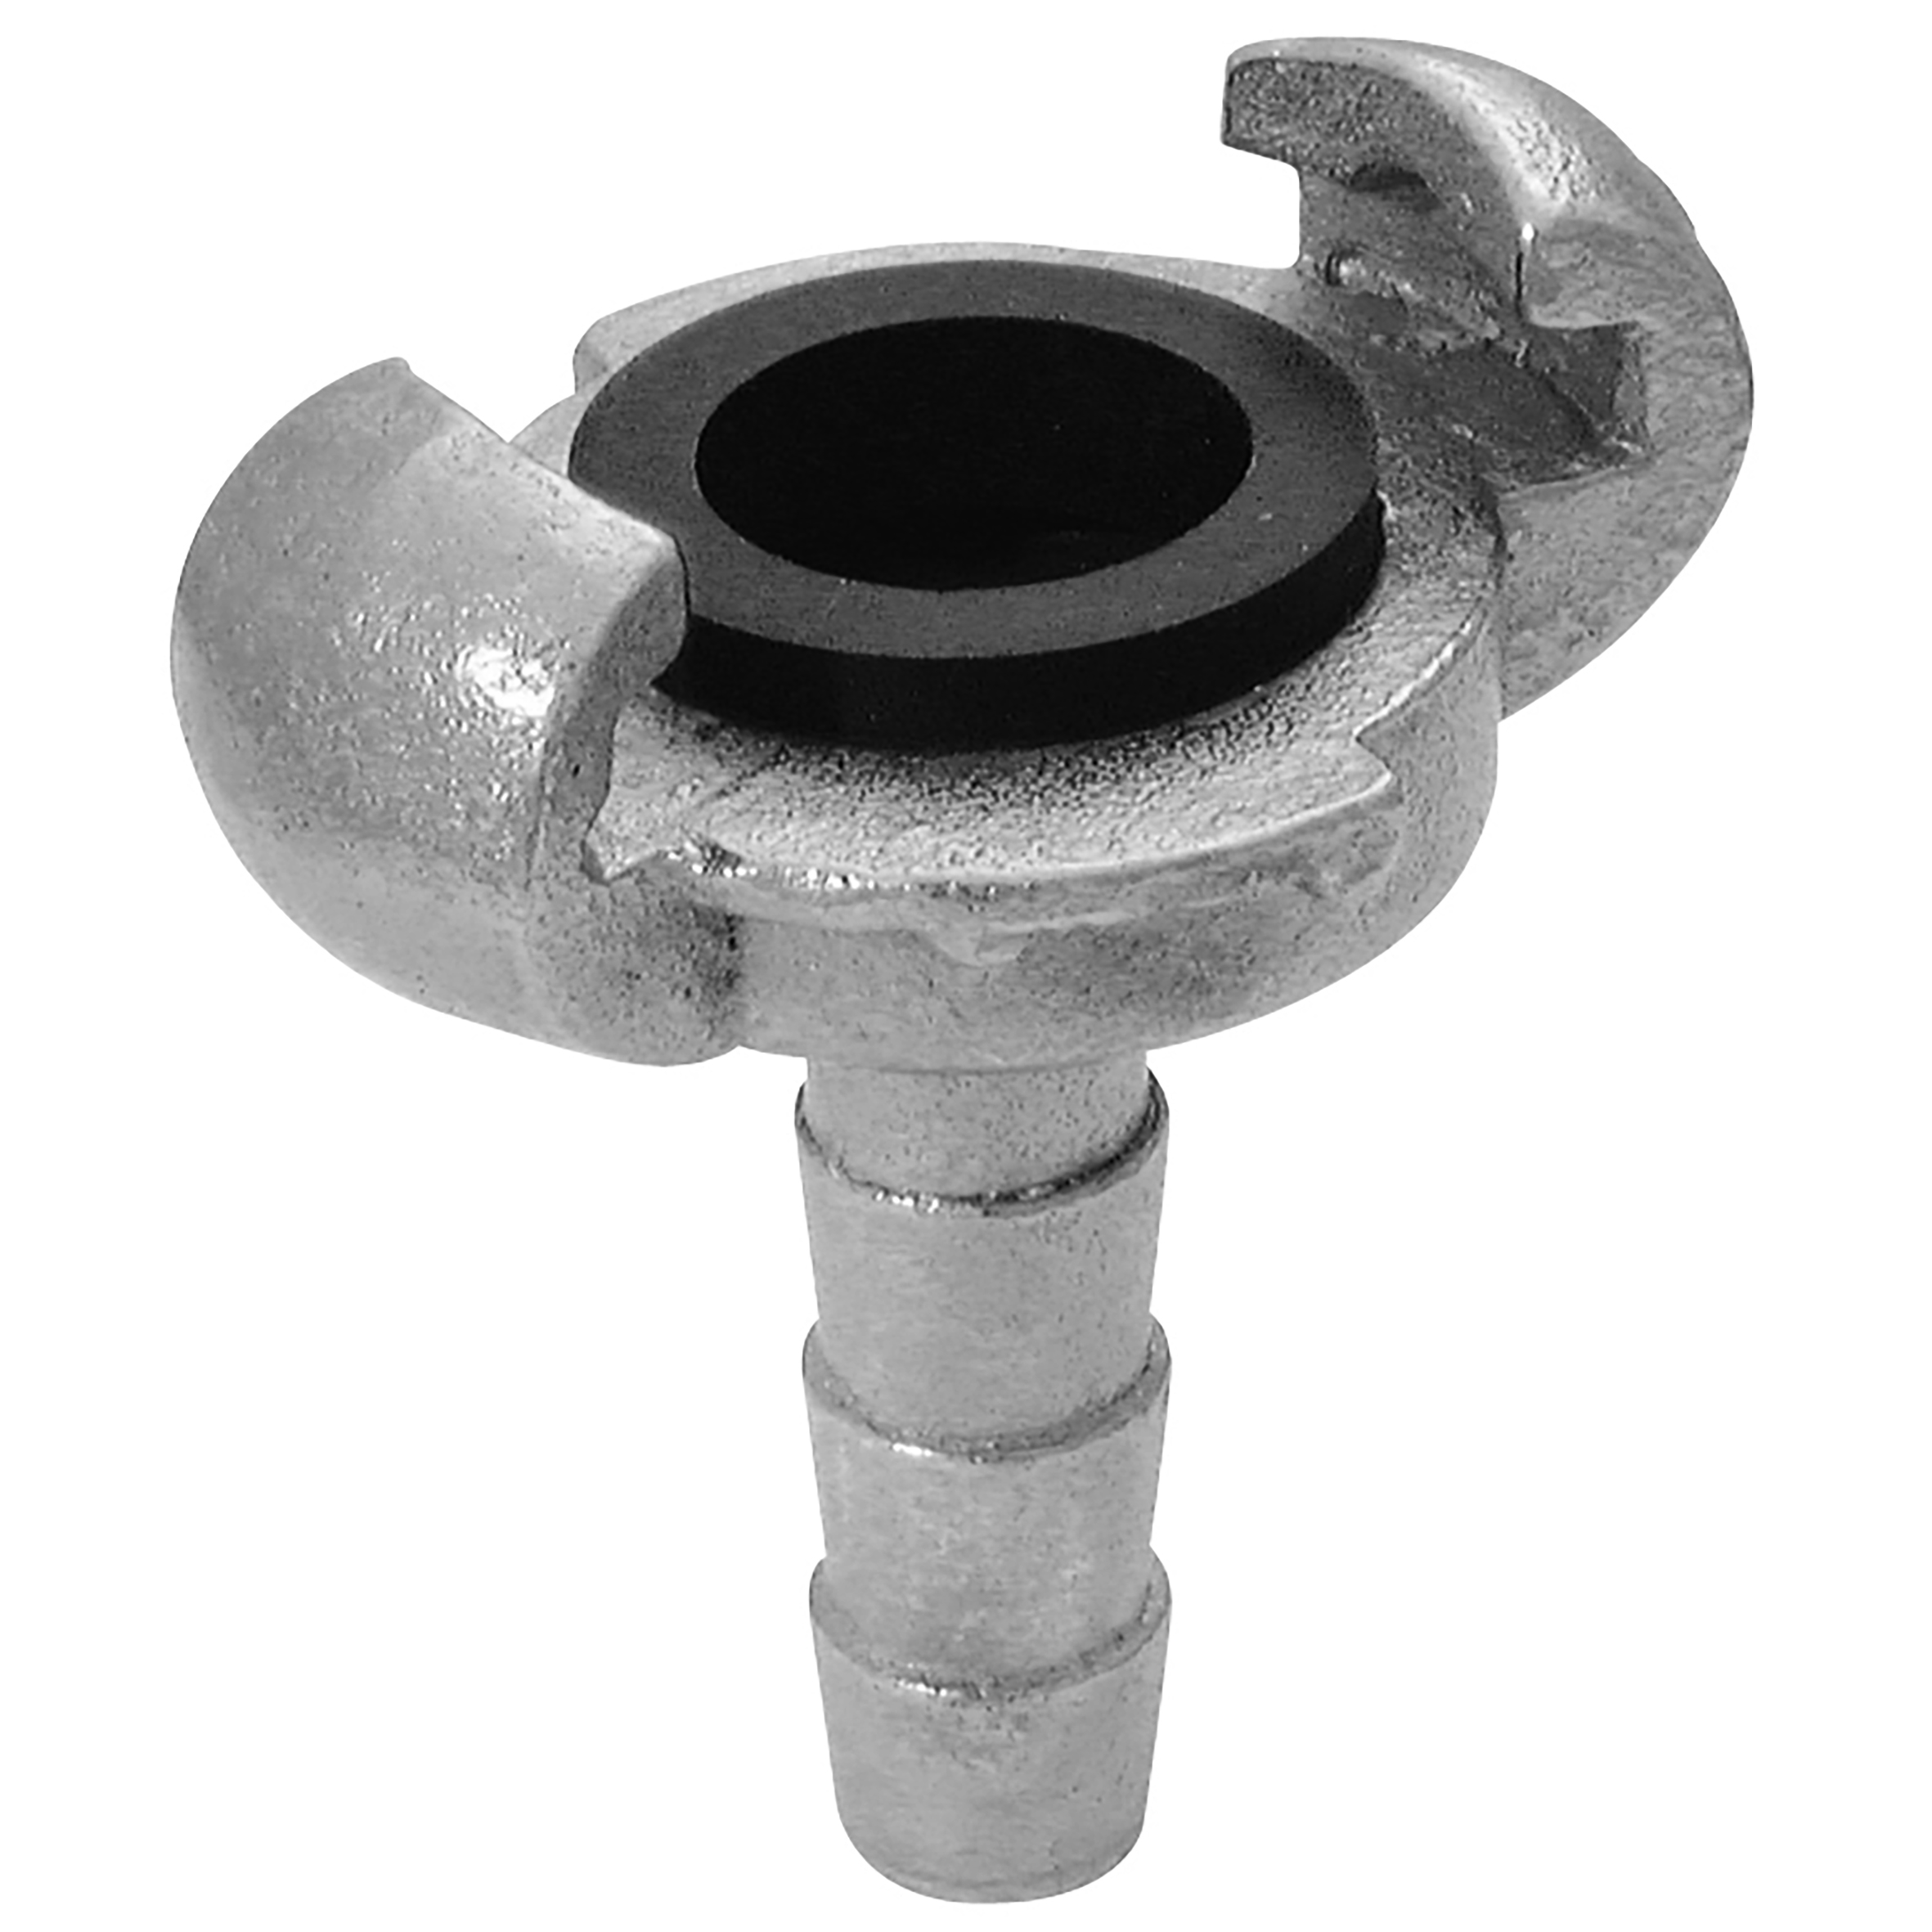 5/8" Claw Coupling